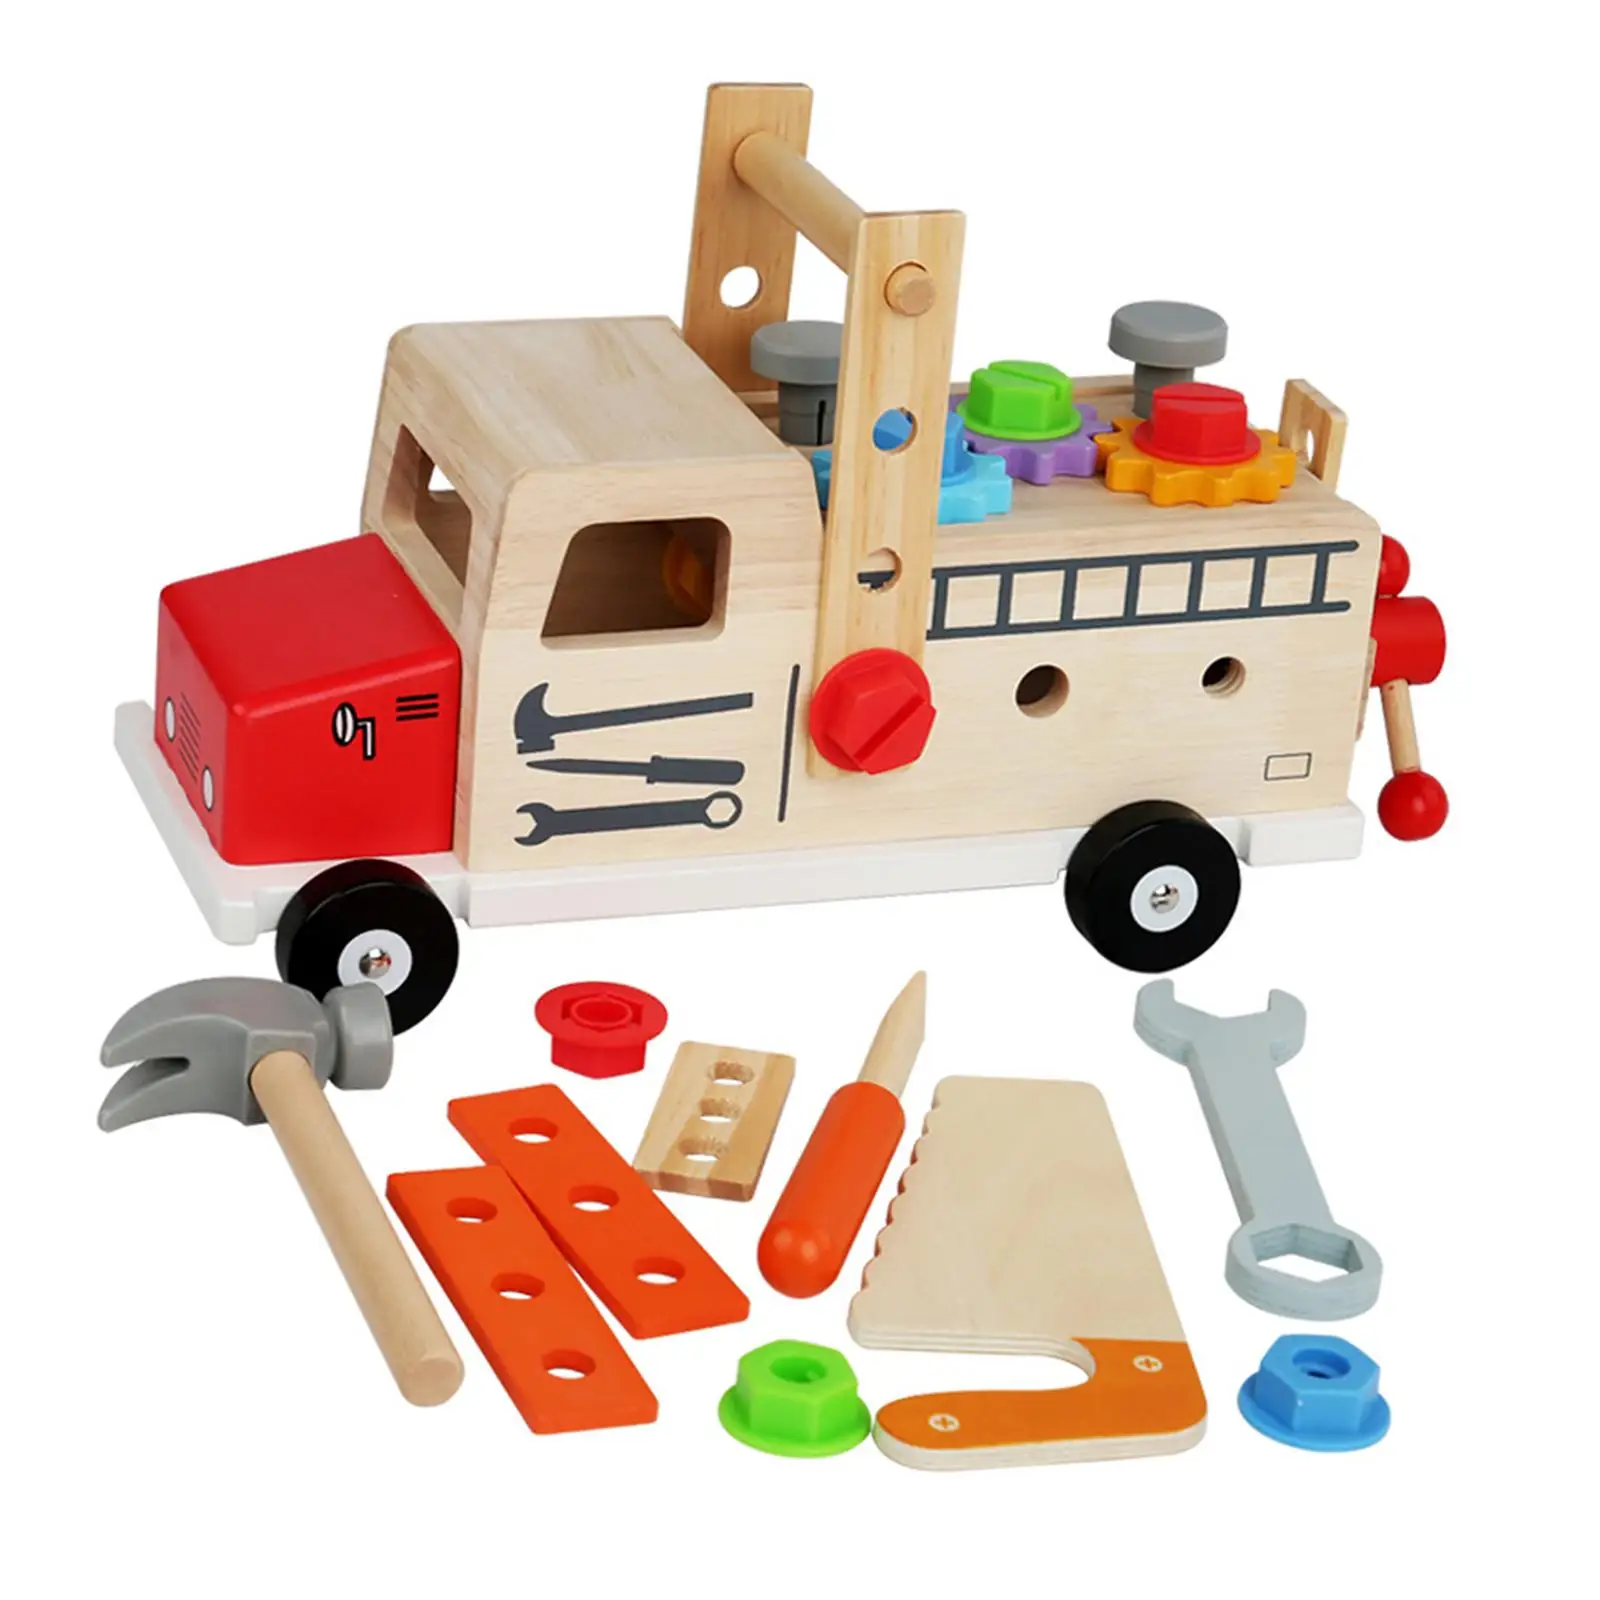 Wood Kids Tool Set Construction Toy Educational Combination Disassembly and Assembly Nut Truck for Boys Girls Kids Ages 3+